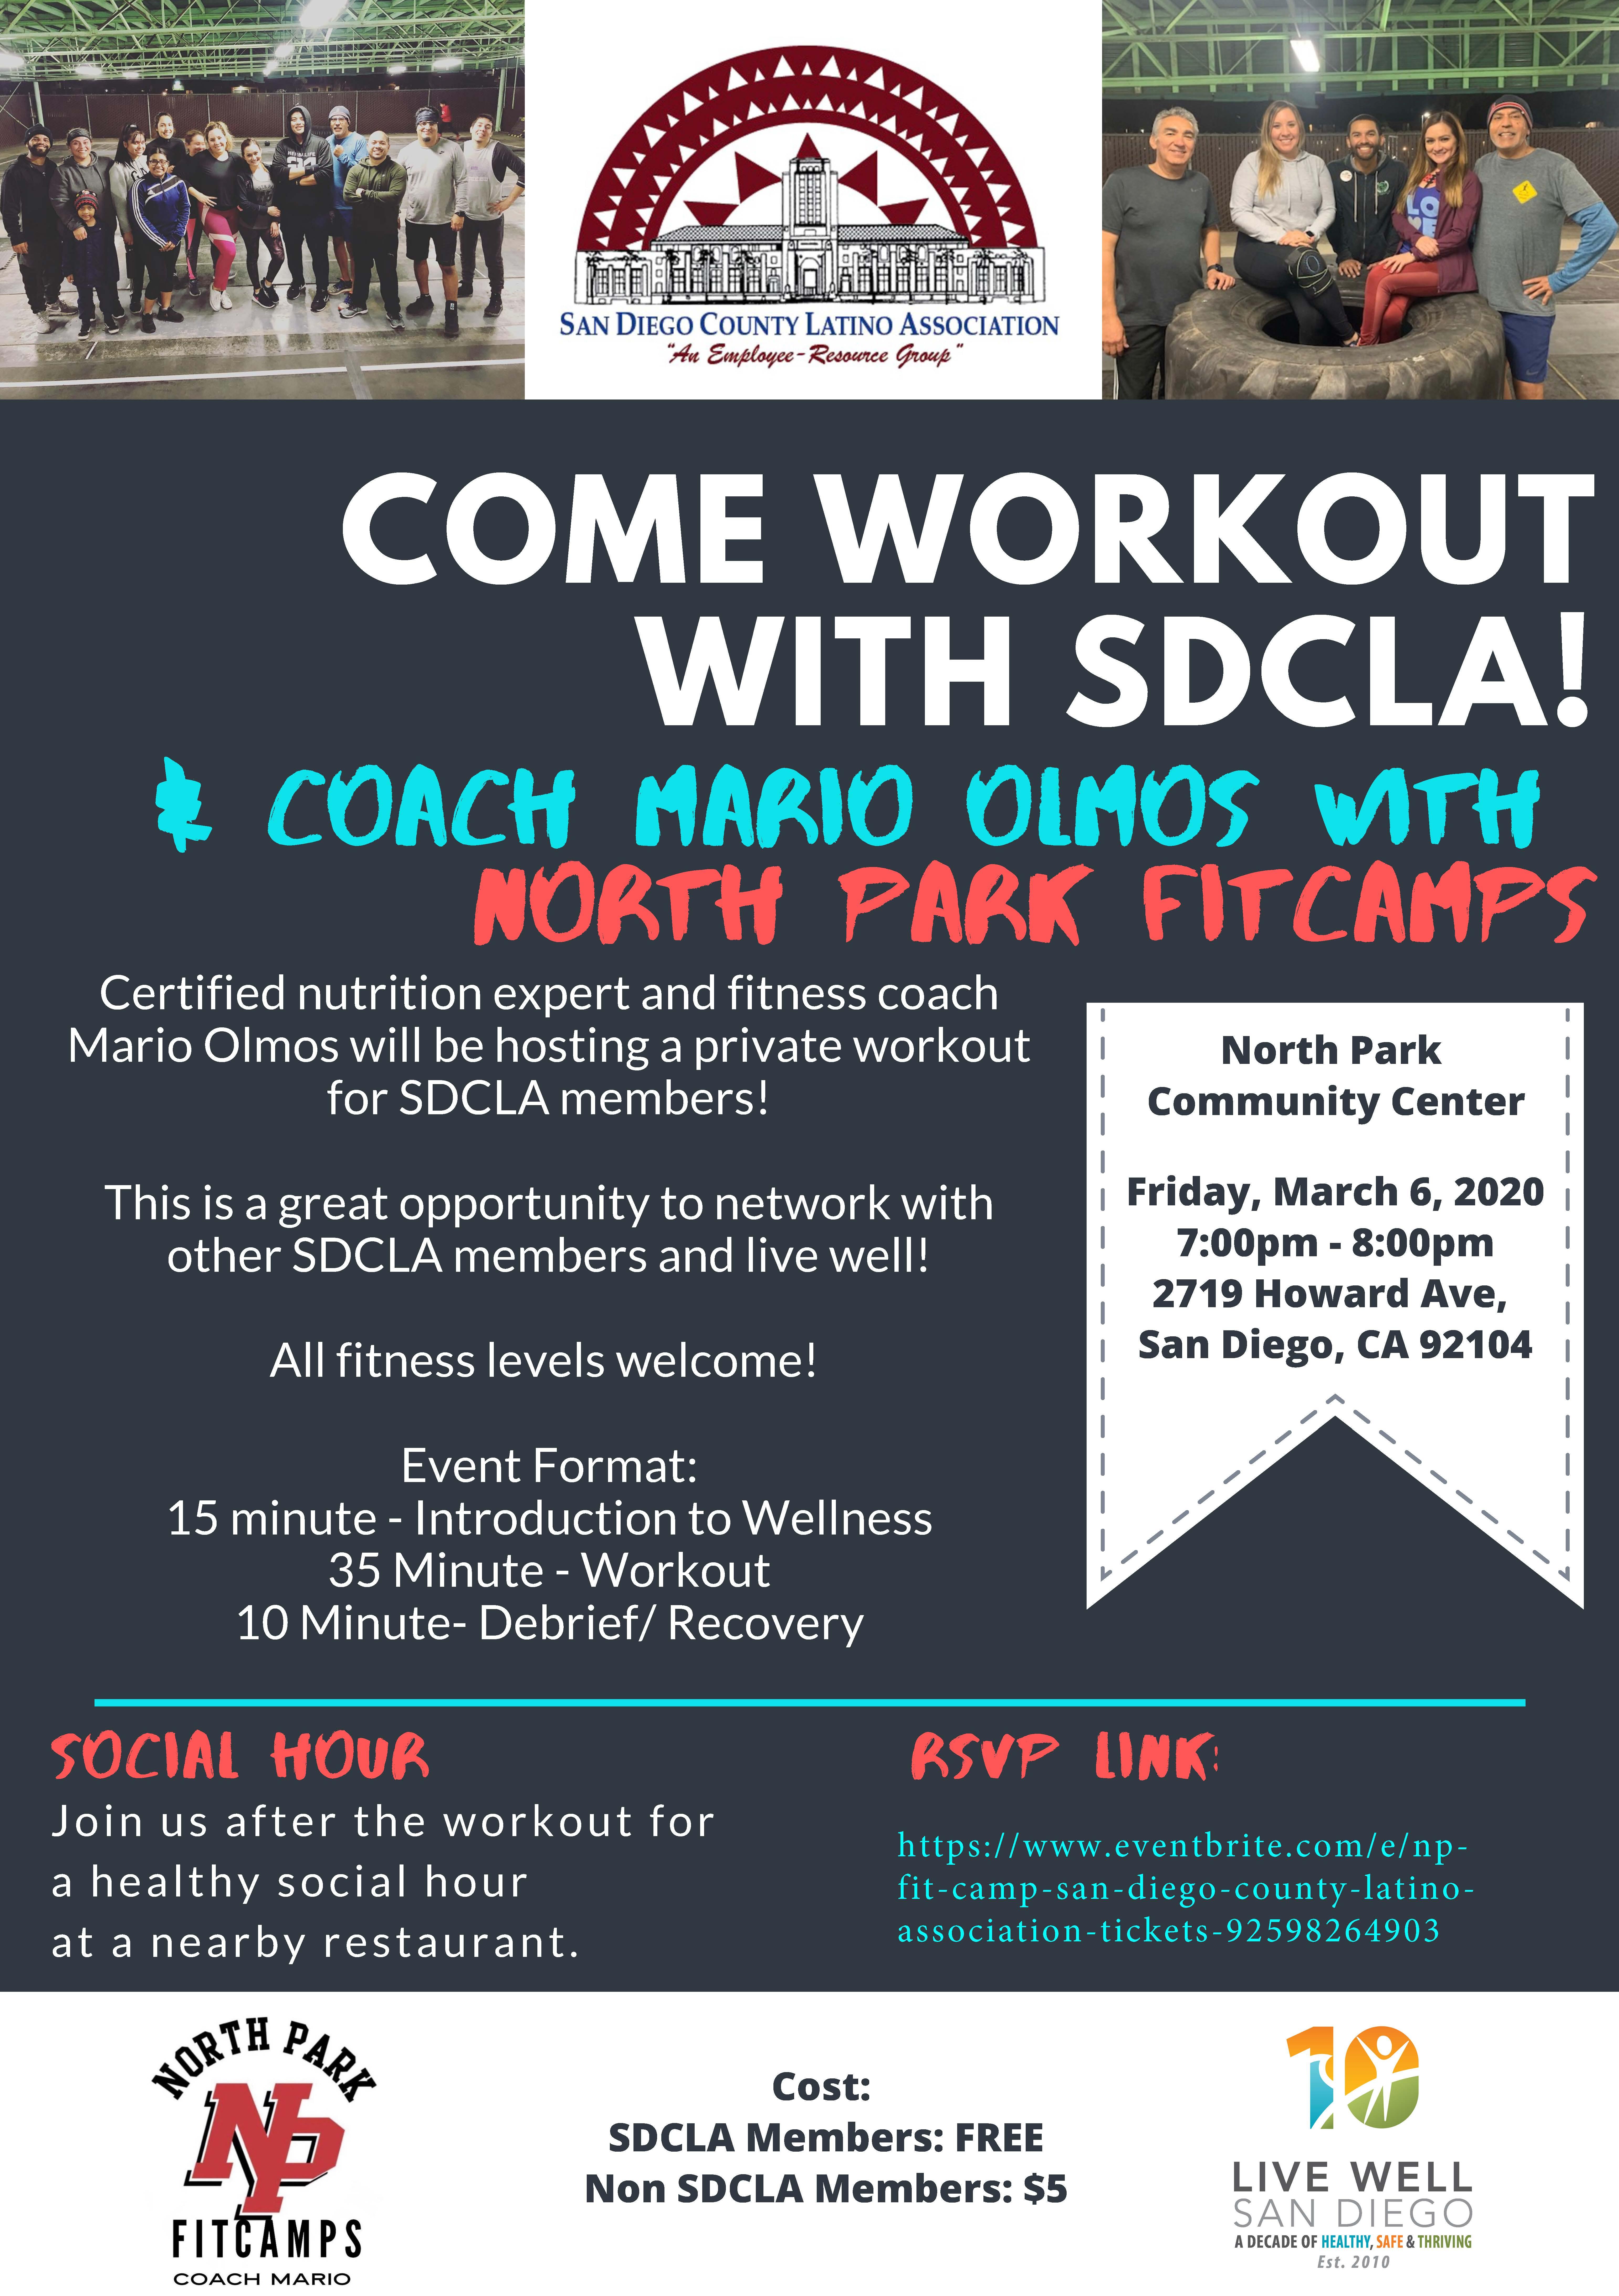 NP Fit Camp & San Diego County Latino Association 